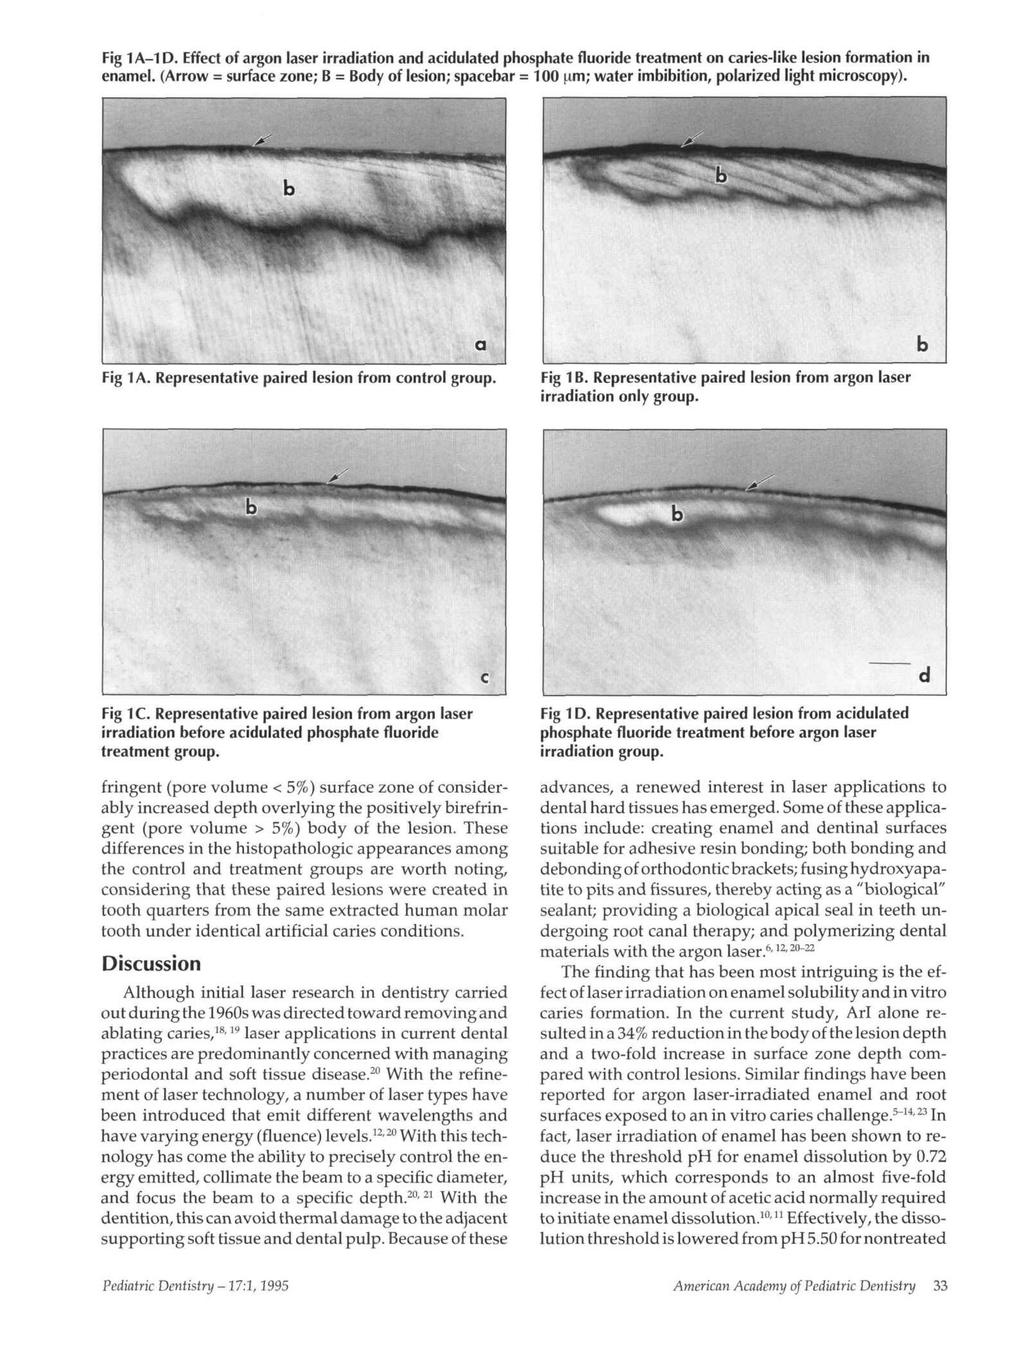 Fig 1A-1D. Effect of argon laser irradiation and acidulated phosphate fluoride treatment on caries-like lesion formation in enamel.